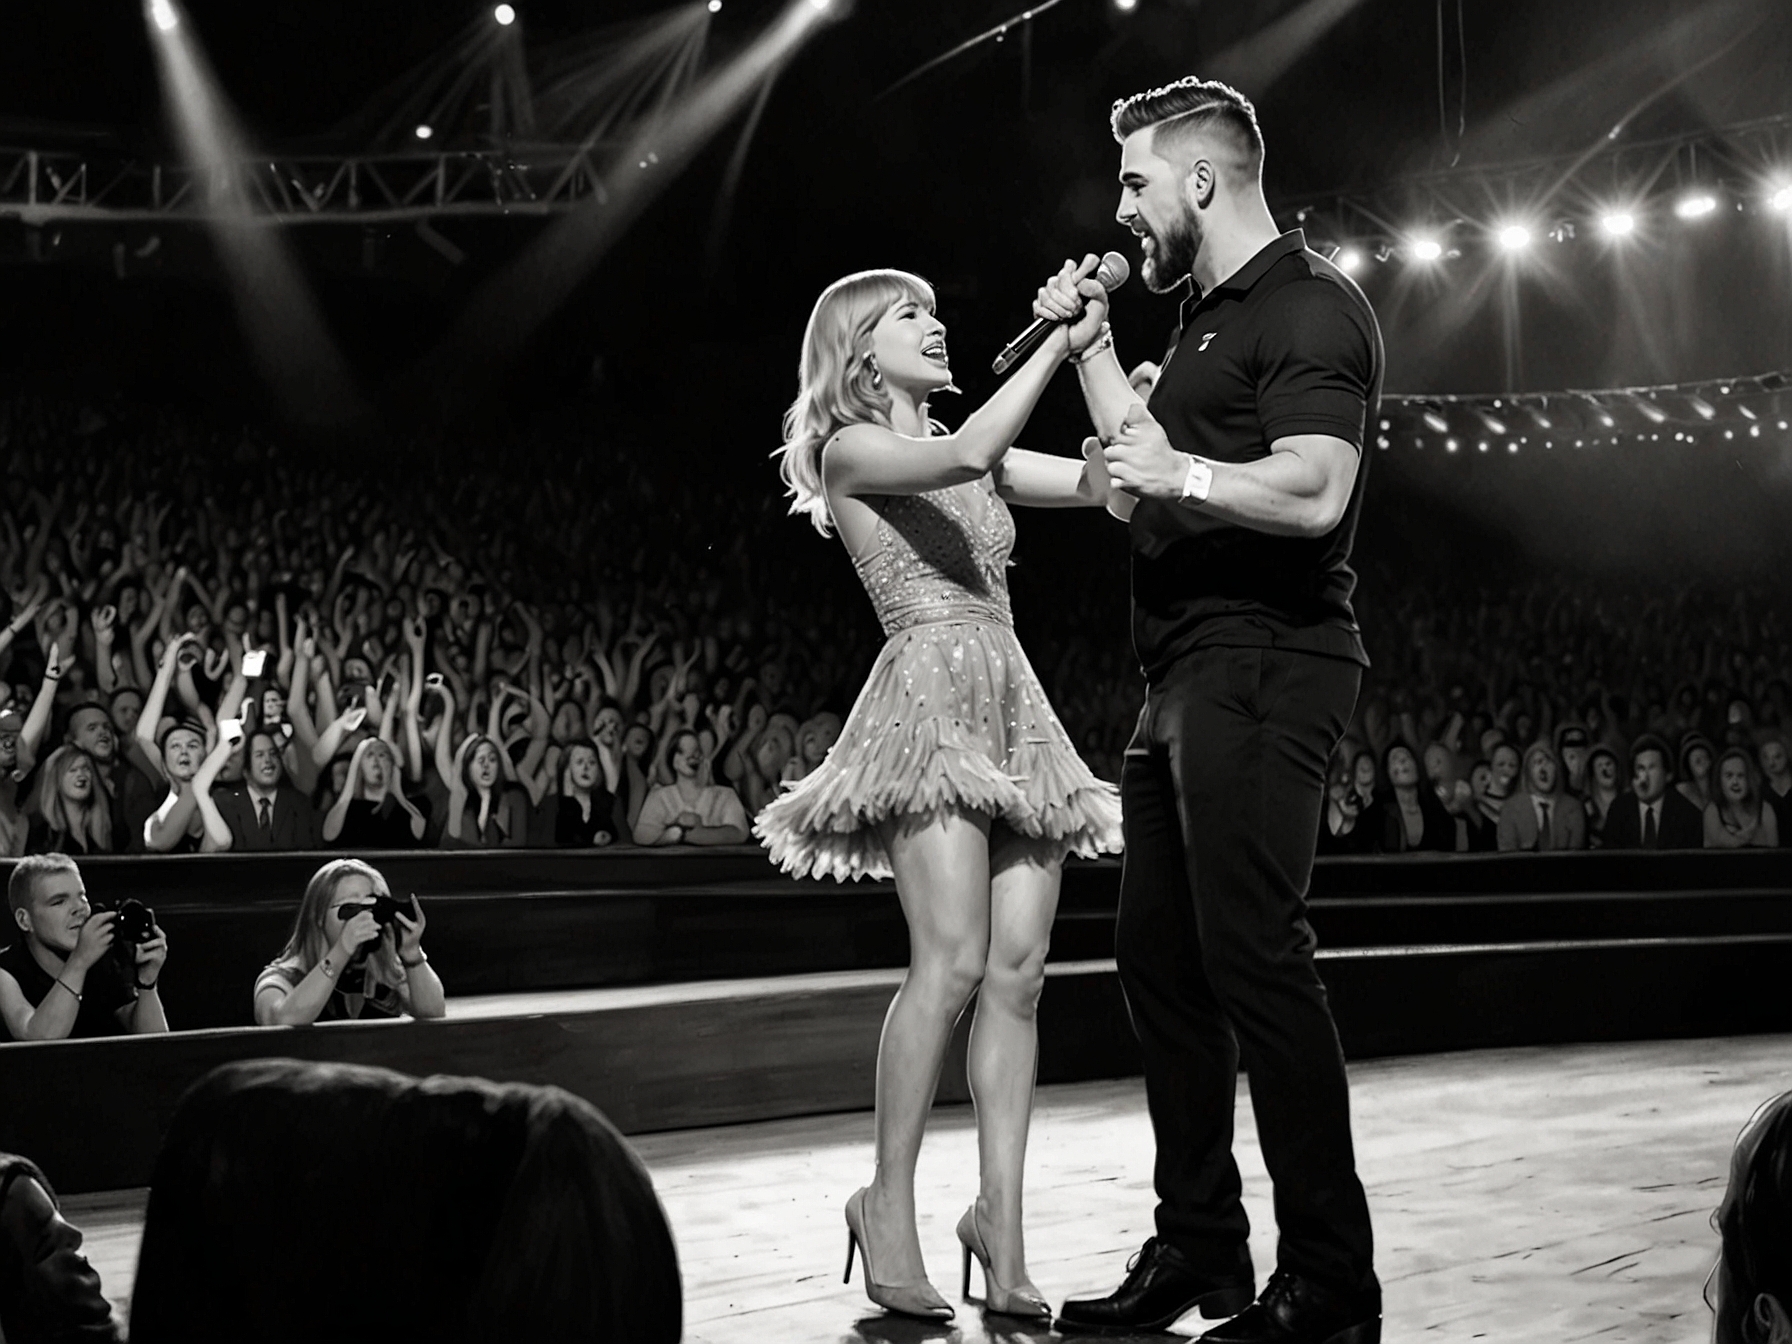 Travis Kelce and Taylor Swift sharing the stage during the 'Era Tours' concert in London, with Kelce captivating the audience and blending seamlessly into the musical atmosphere.